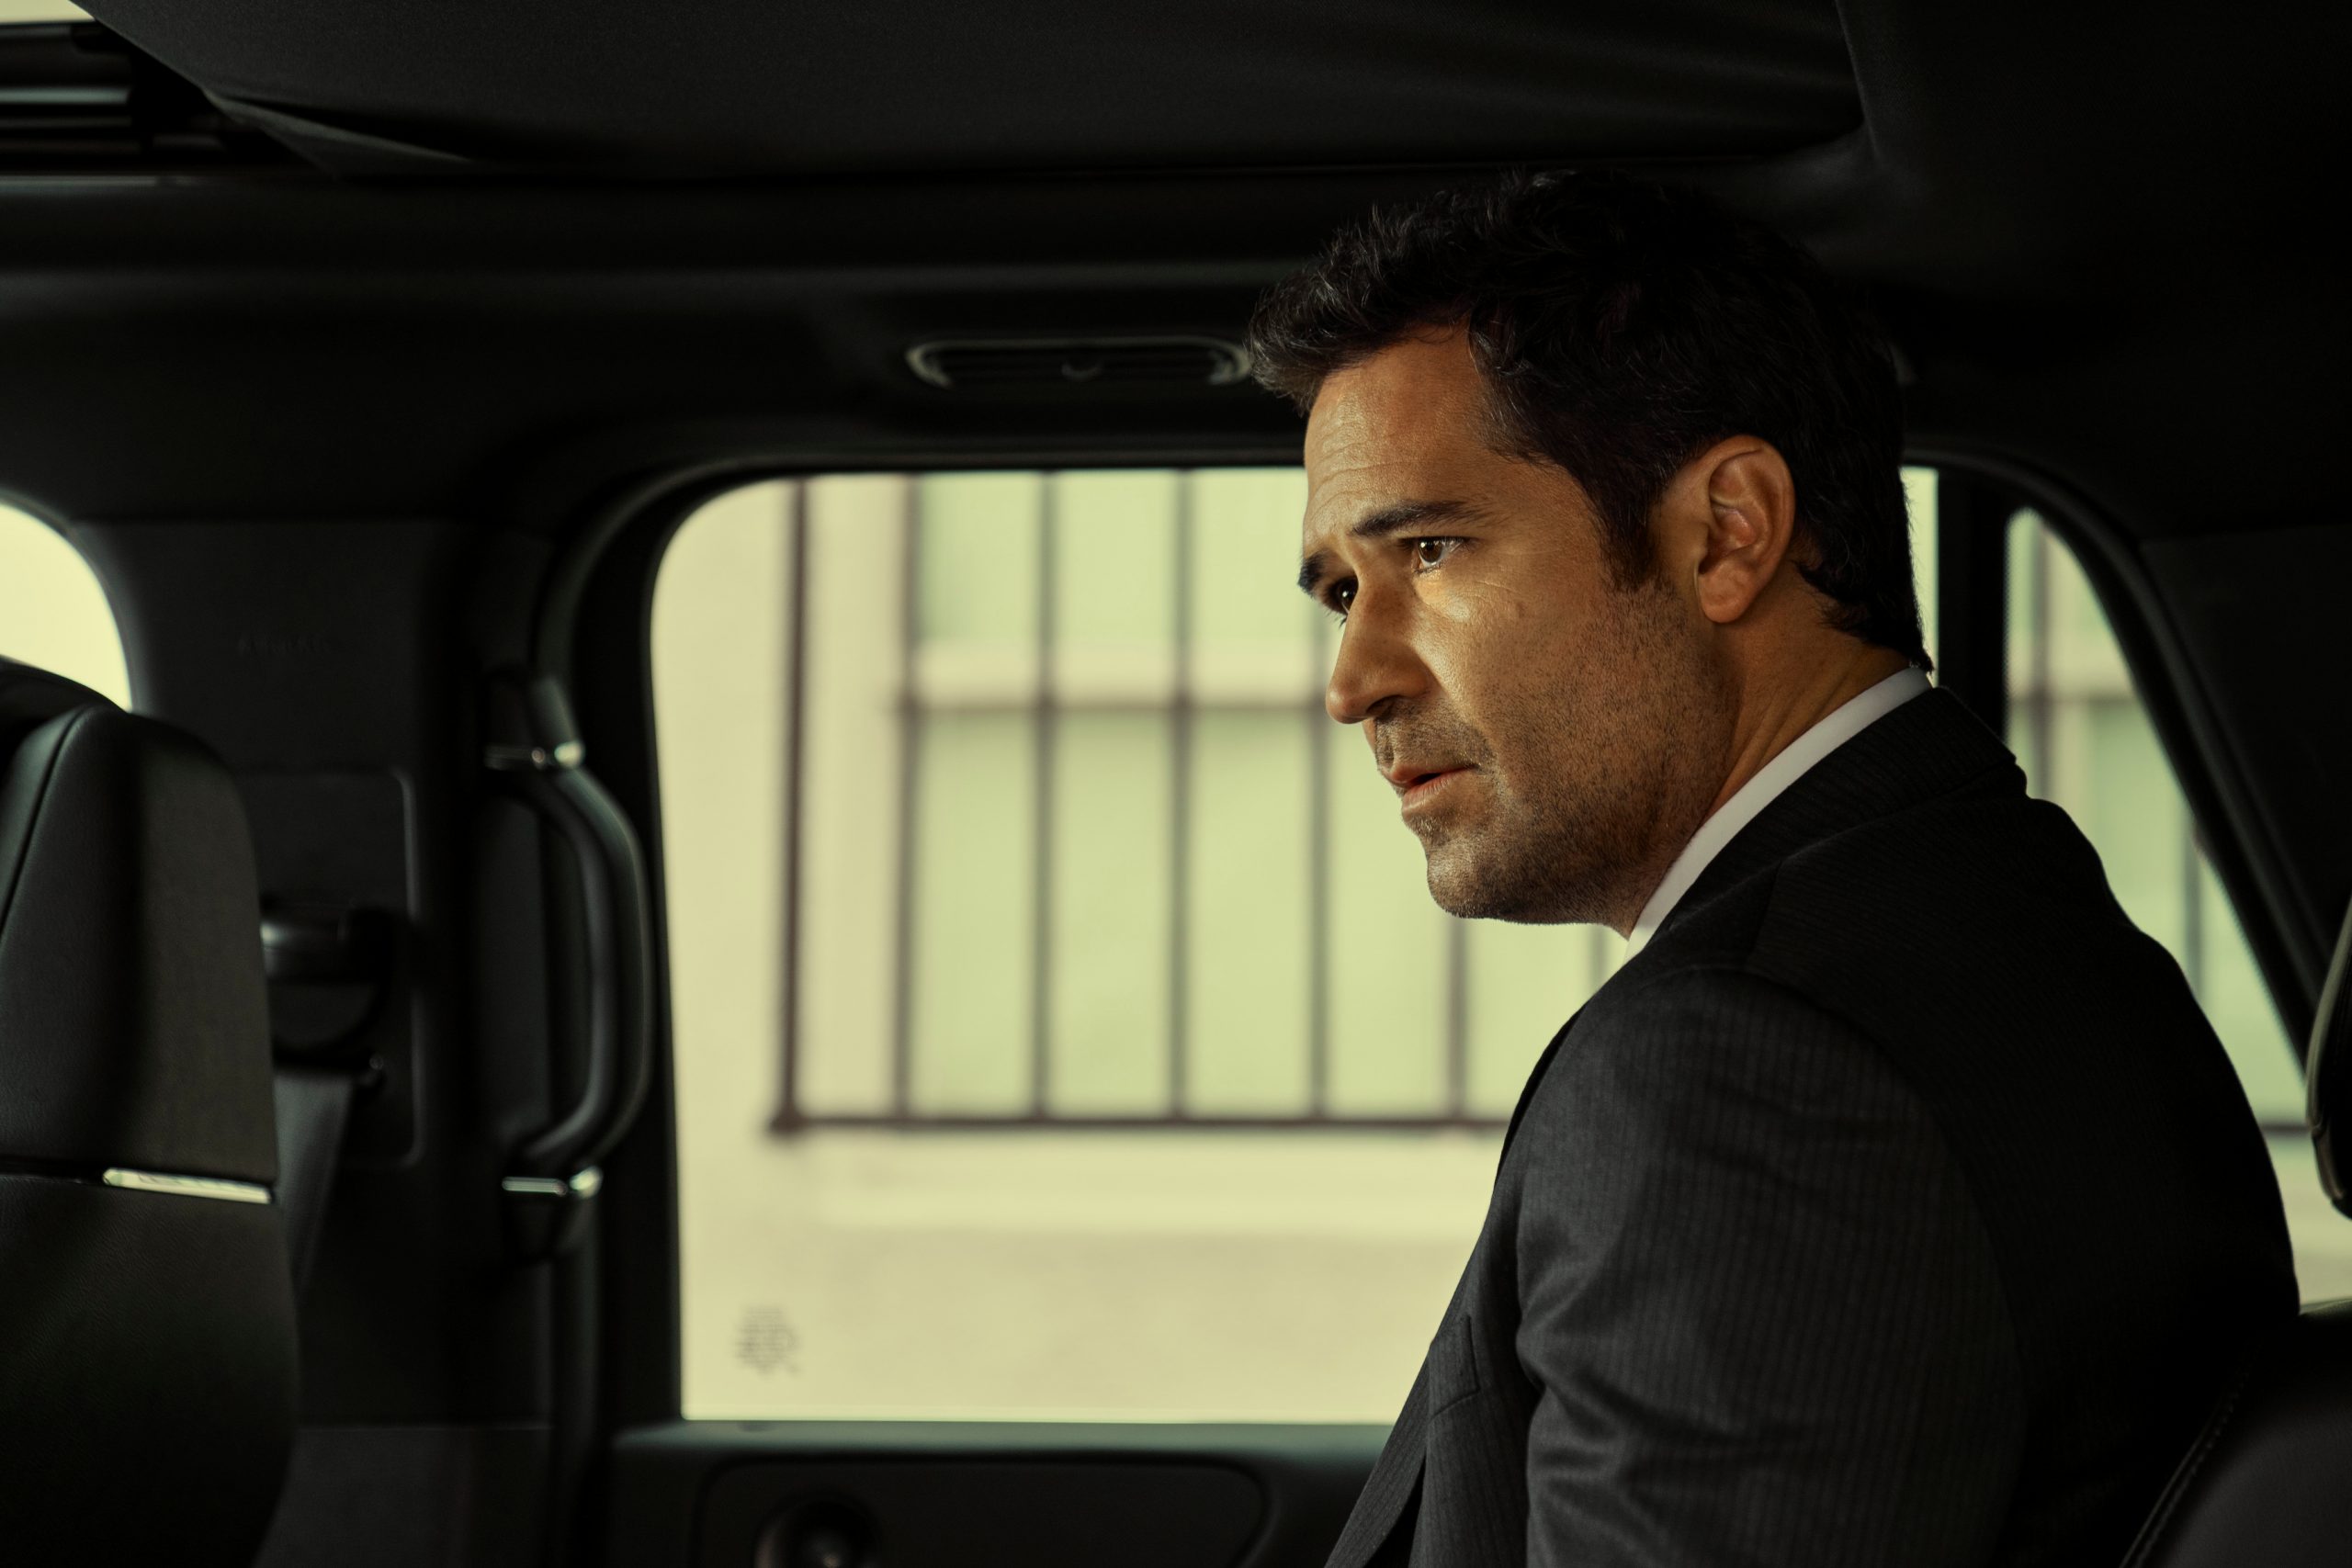 The Lincoln Lawyer. Manuel Garcia-Rulfo as Mickey Haller in episode 107 of The Lincoln Lawyer. Cr. Lara Solanki/Netflix © 2022